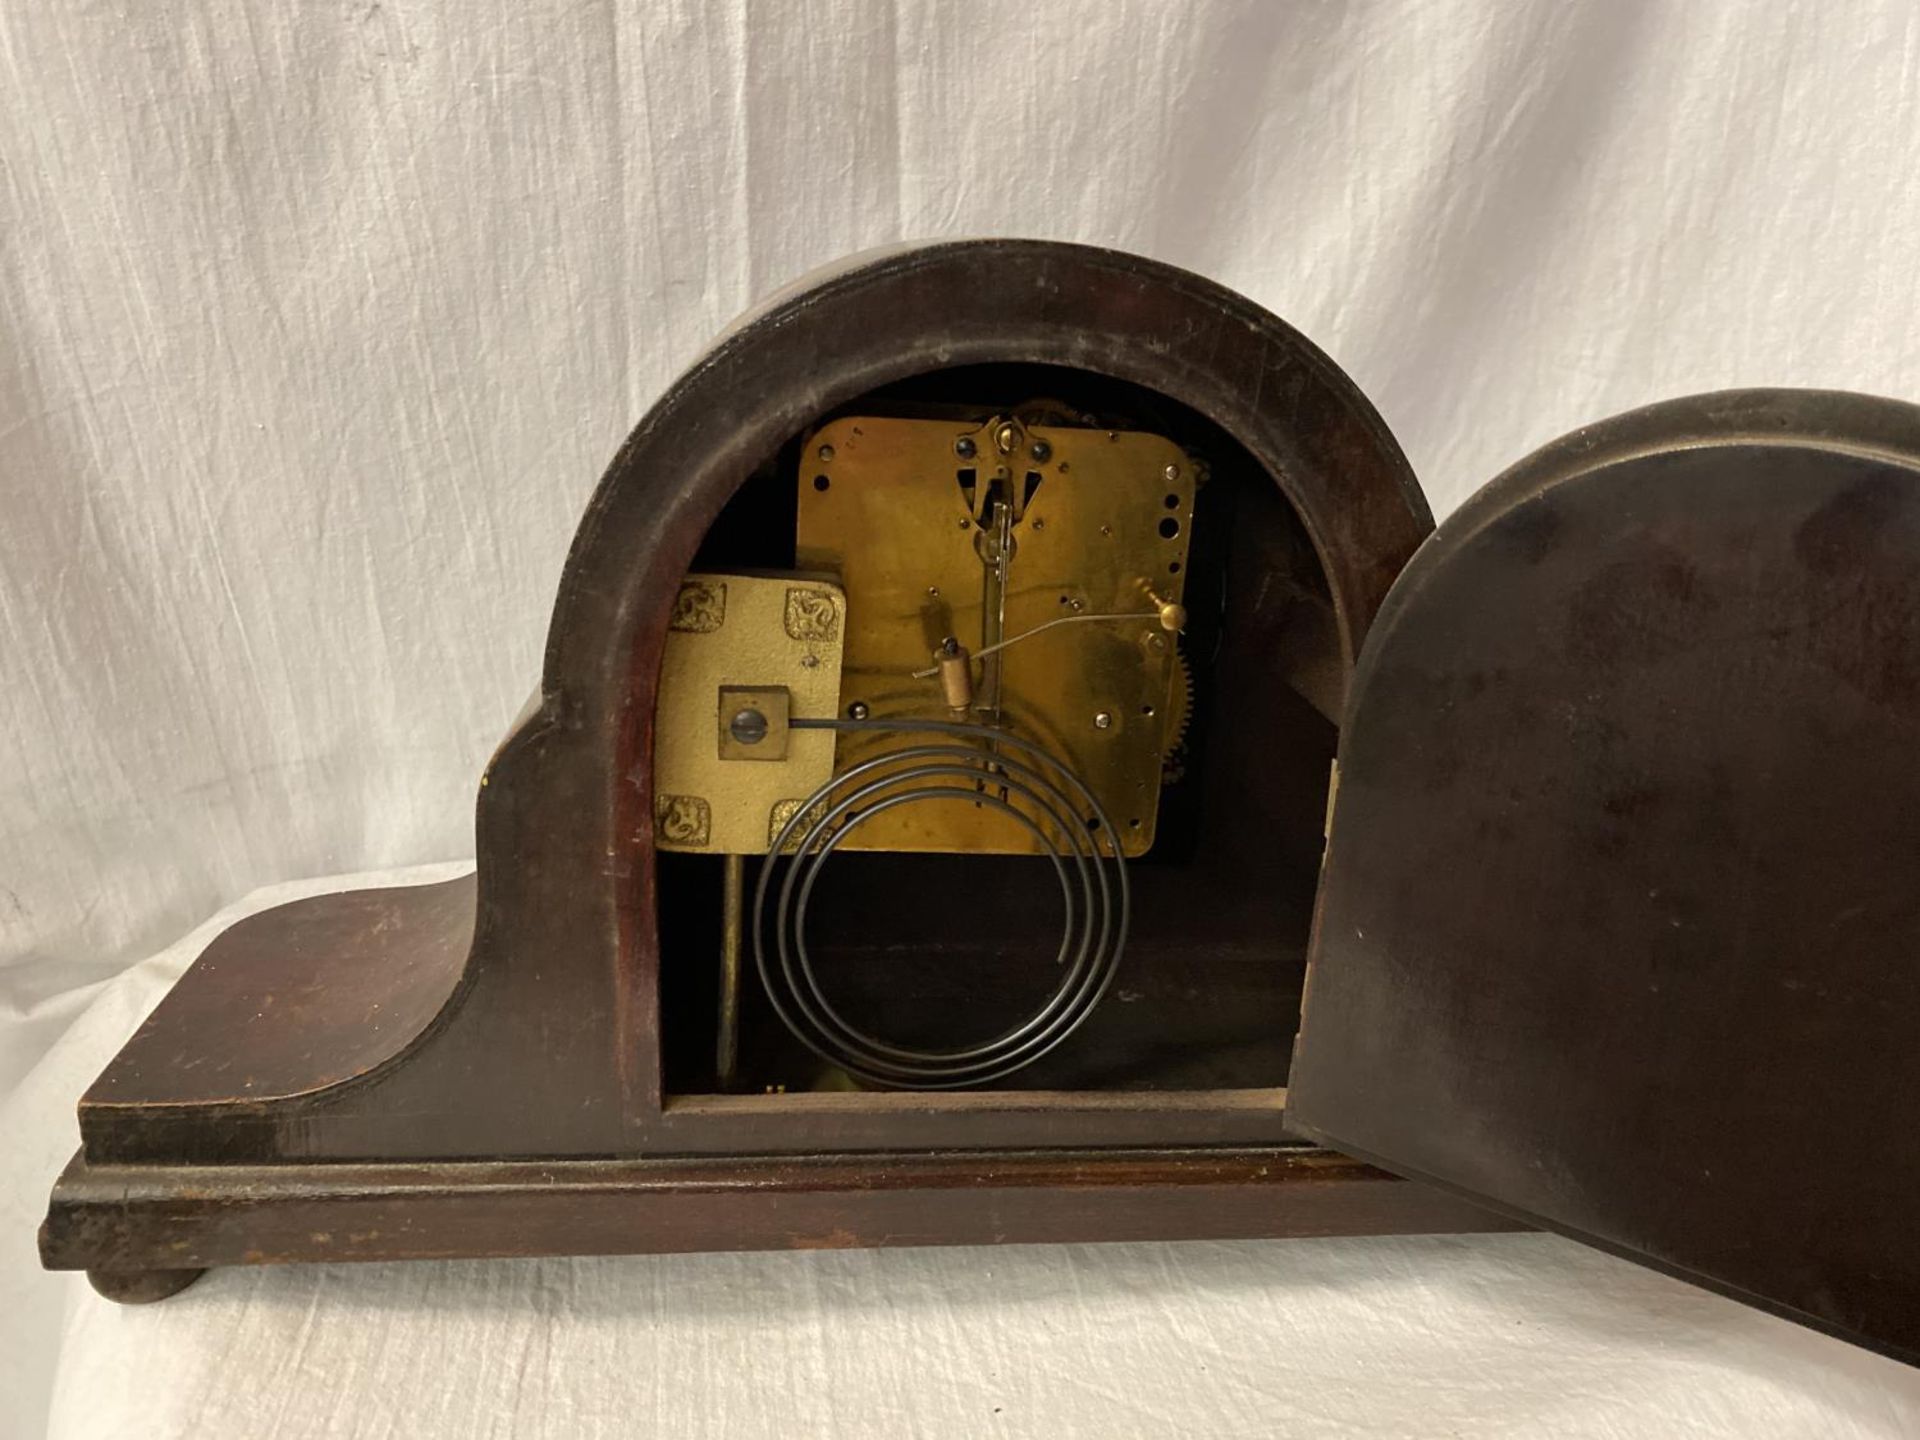 TWO MANTEL CLOCKS, ONE A MAHOGANY NAPOLEON HAT EXAMPLE AND THE OTHER AN ART DECO STYLE - Image 8 of 8